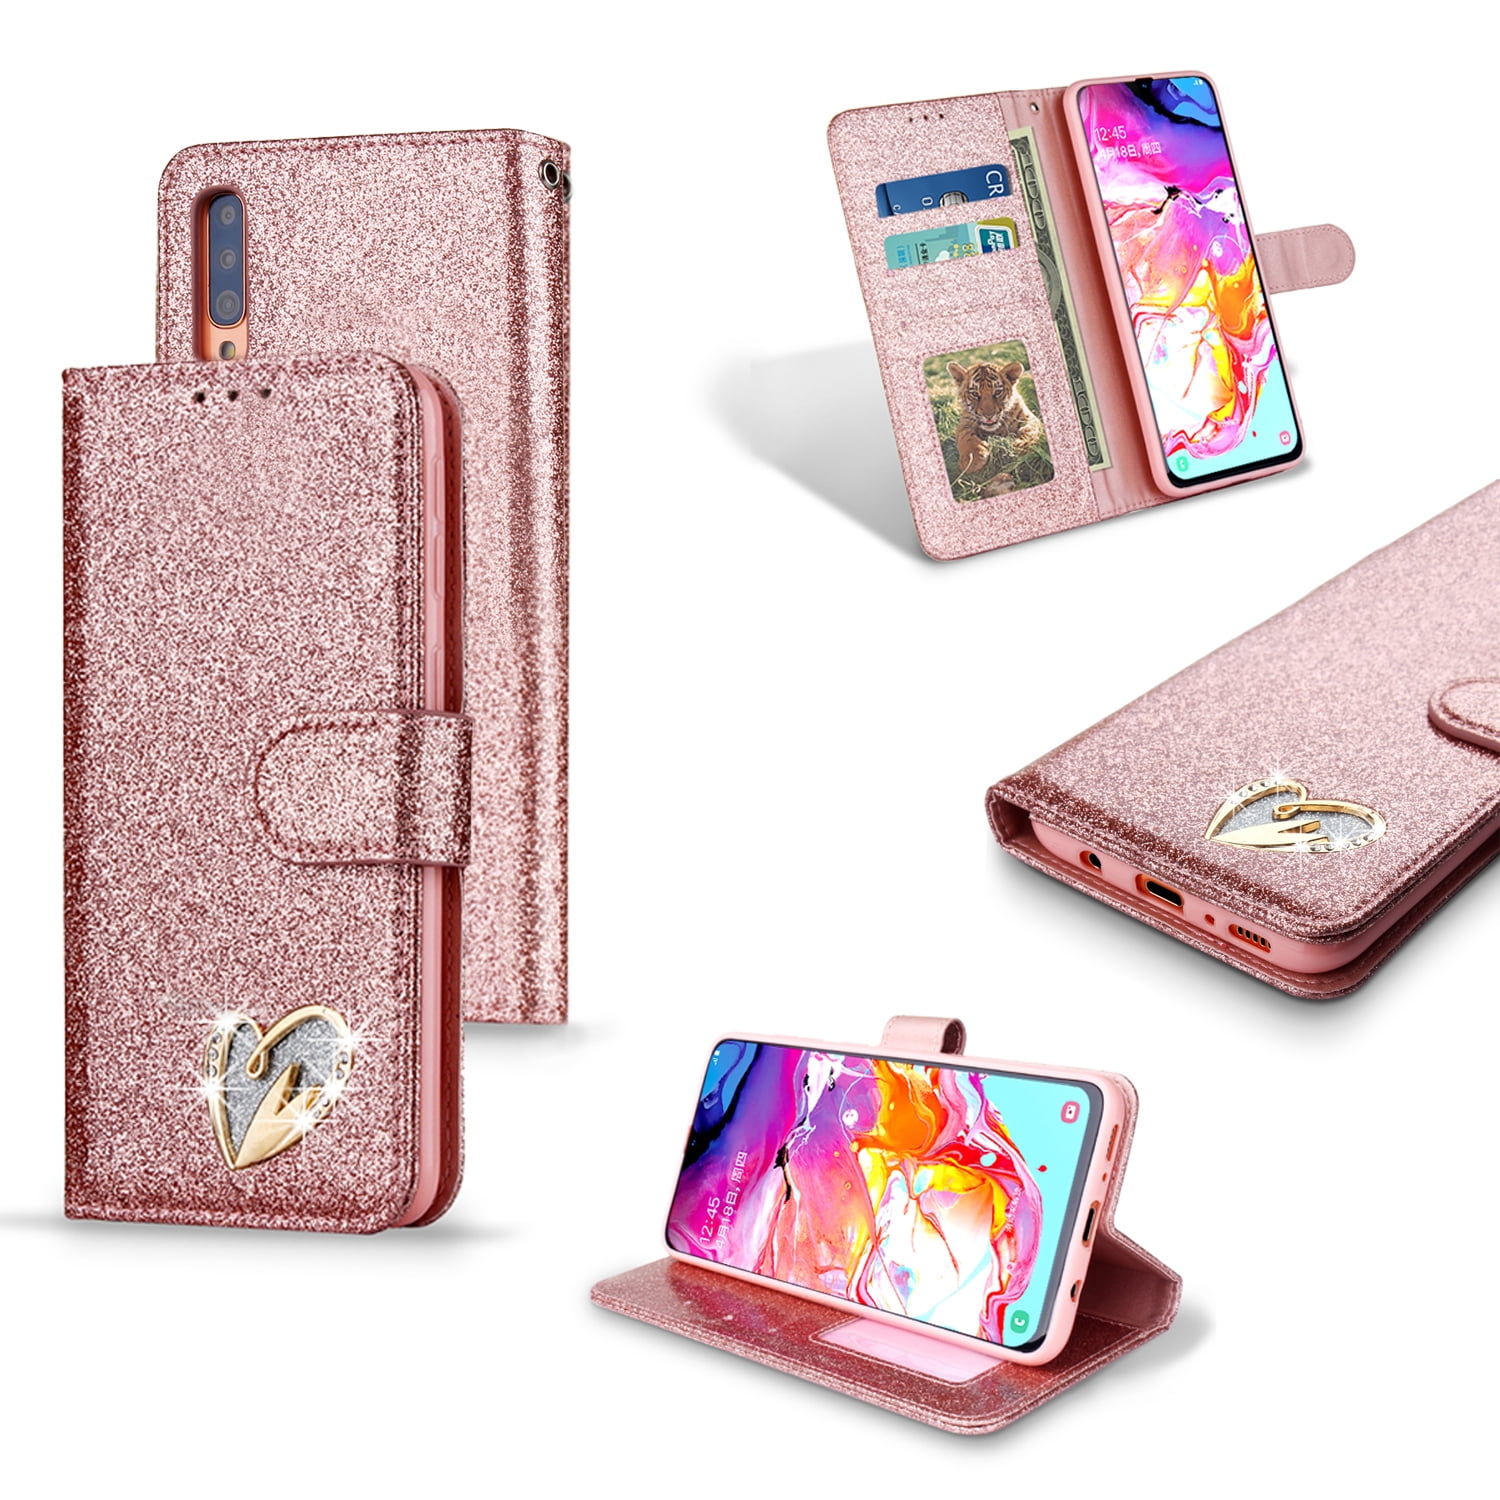 Phone Case for Samsung Galaxy A70 Owl 3D Glitter Shockproof Leather Flip Wallet Cases Sparkly Magnetic Folio Slim Fit TPU Bumper with Stand Card Holder Slots Cover for Samsung Galaxy A70 Rose Gold